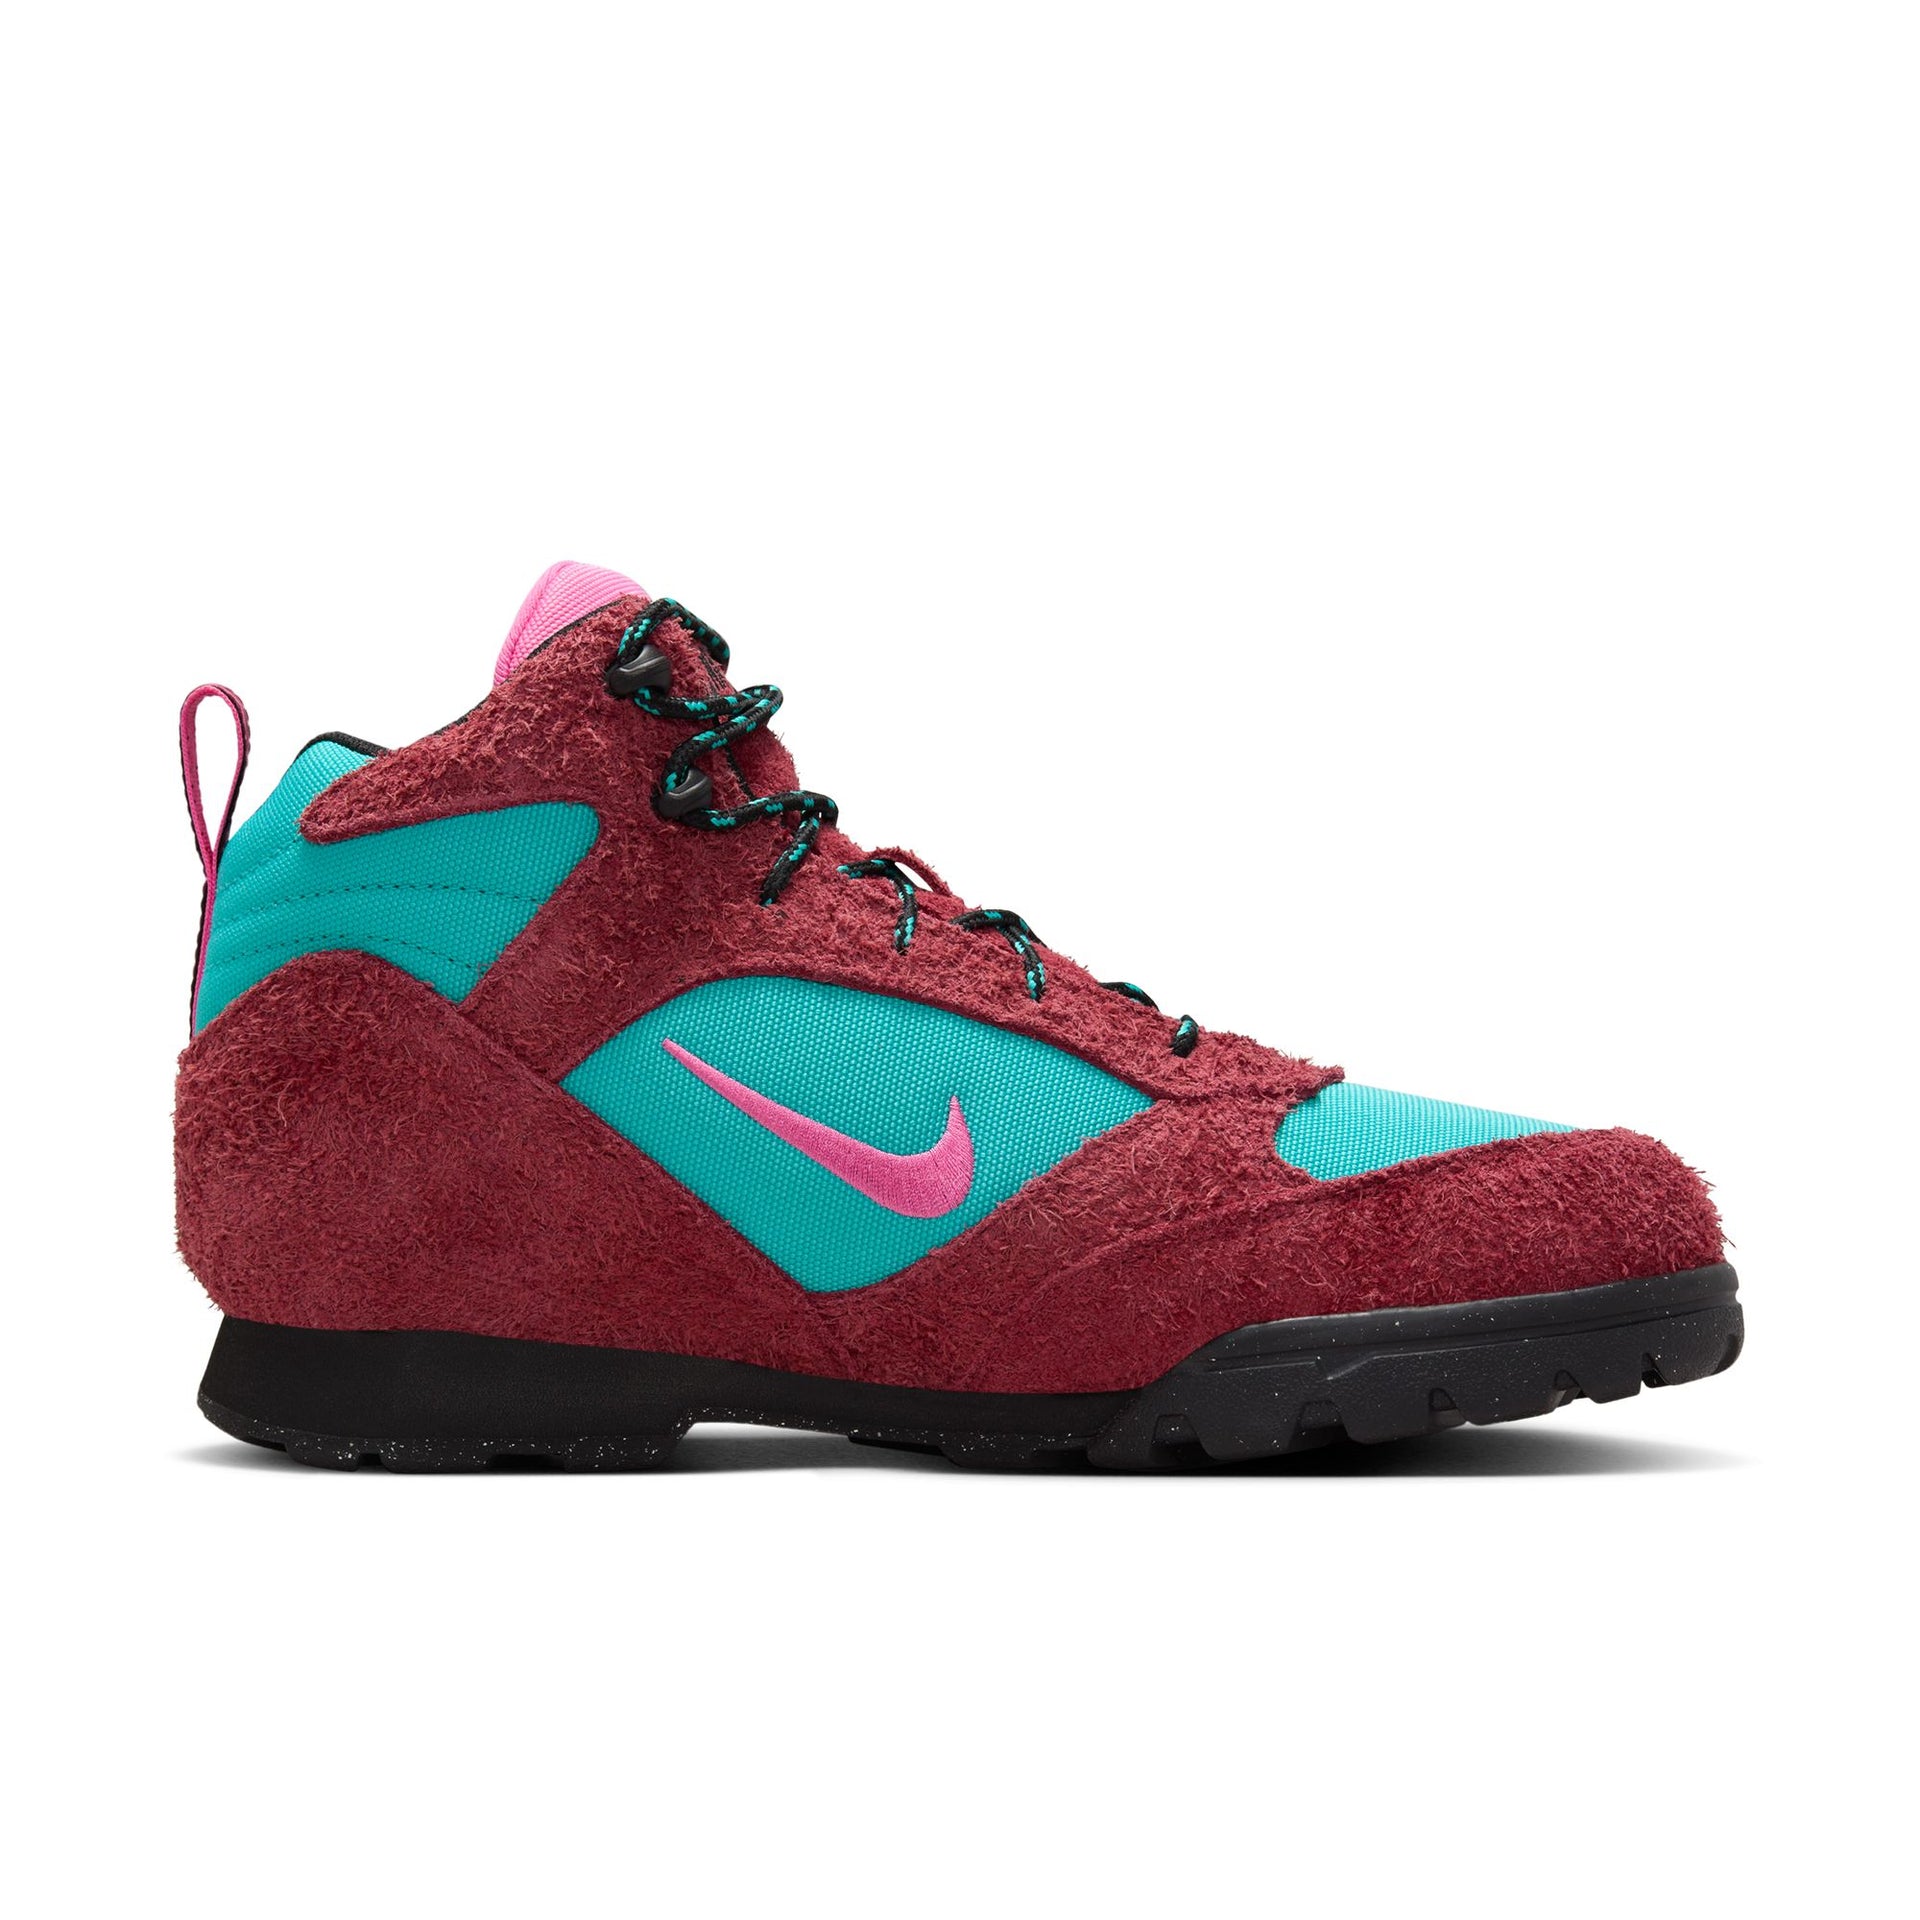 Nike ACG Torre Mid WP Team Red Dusty Cactus